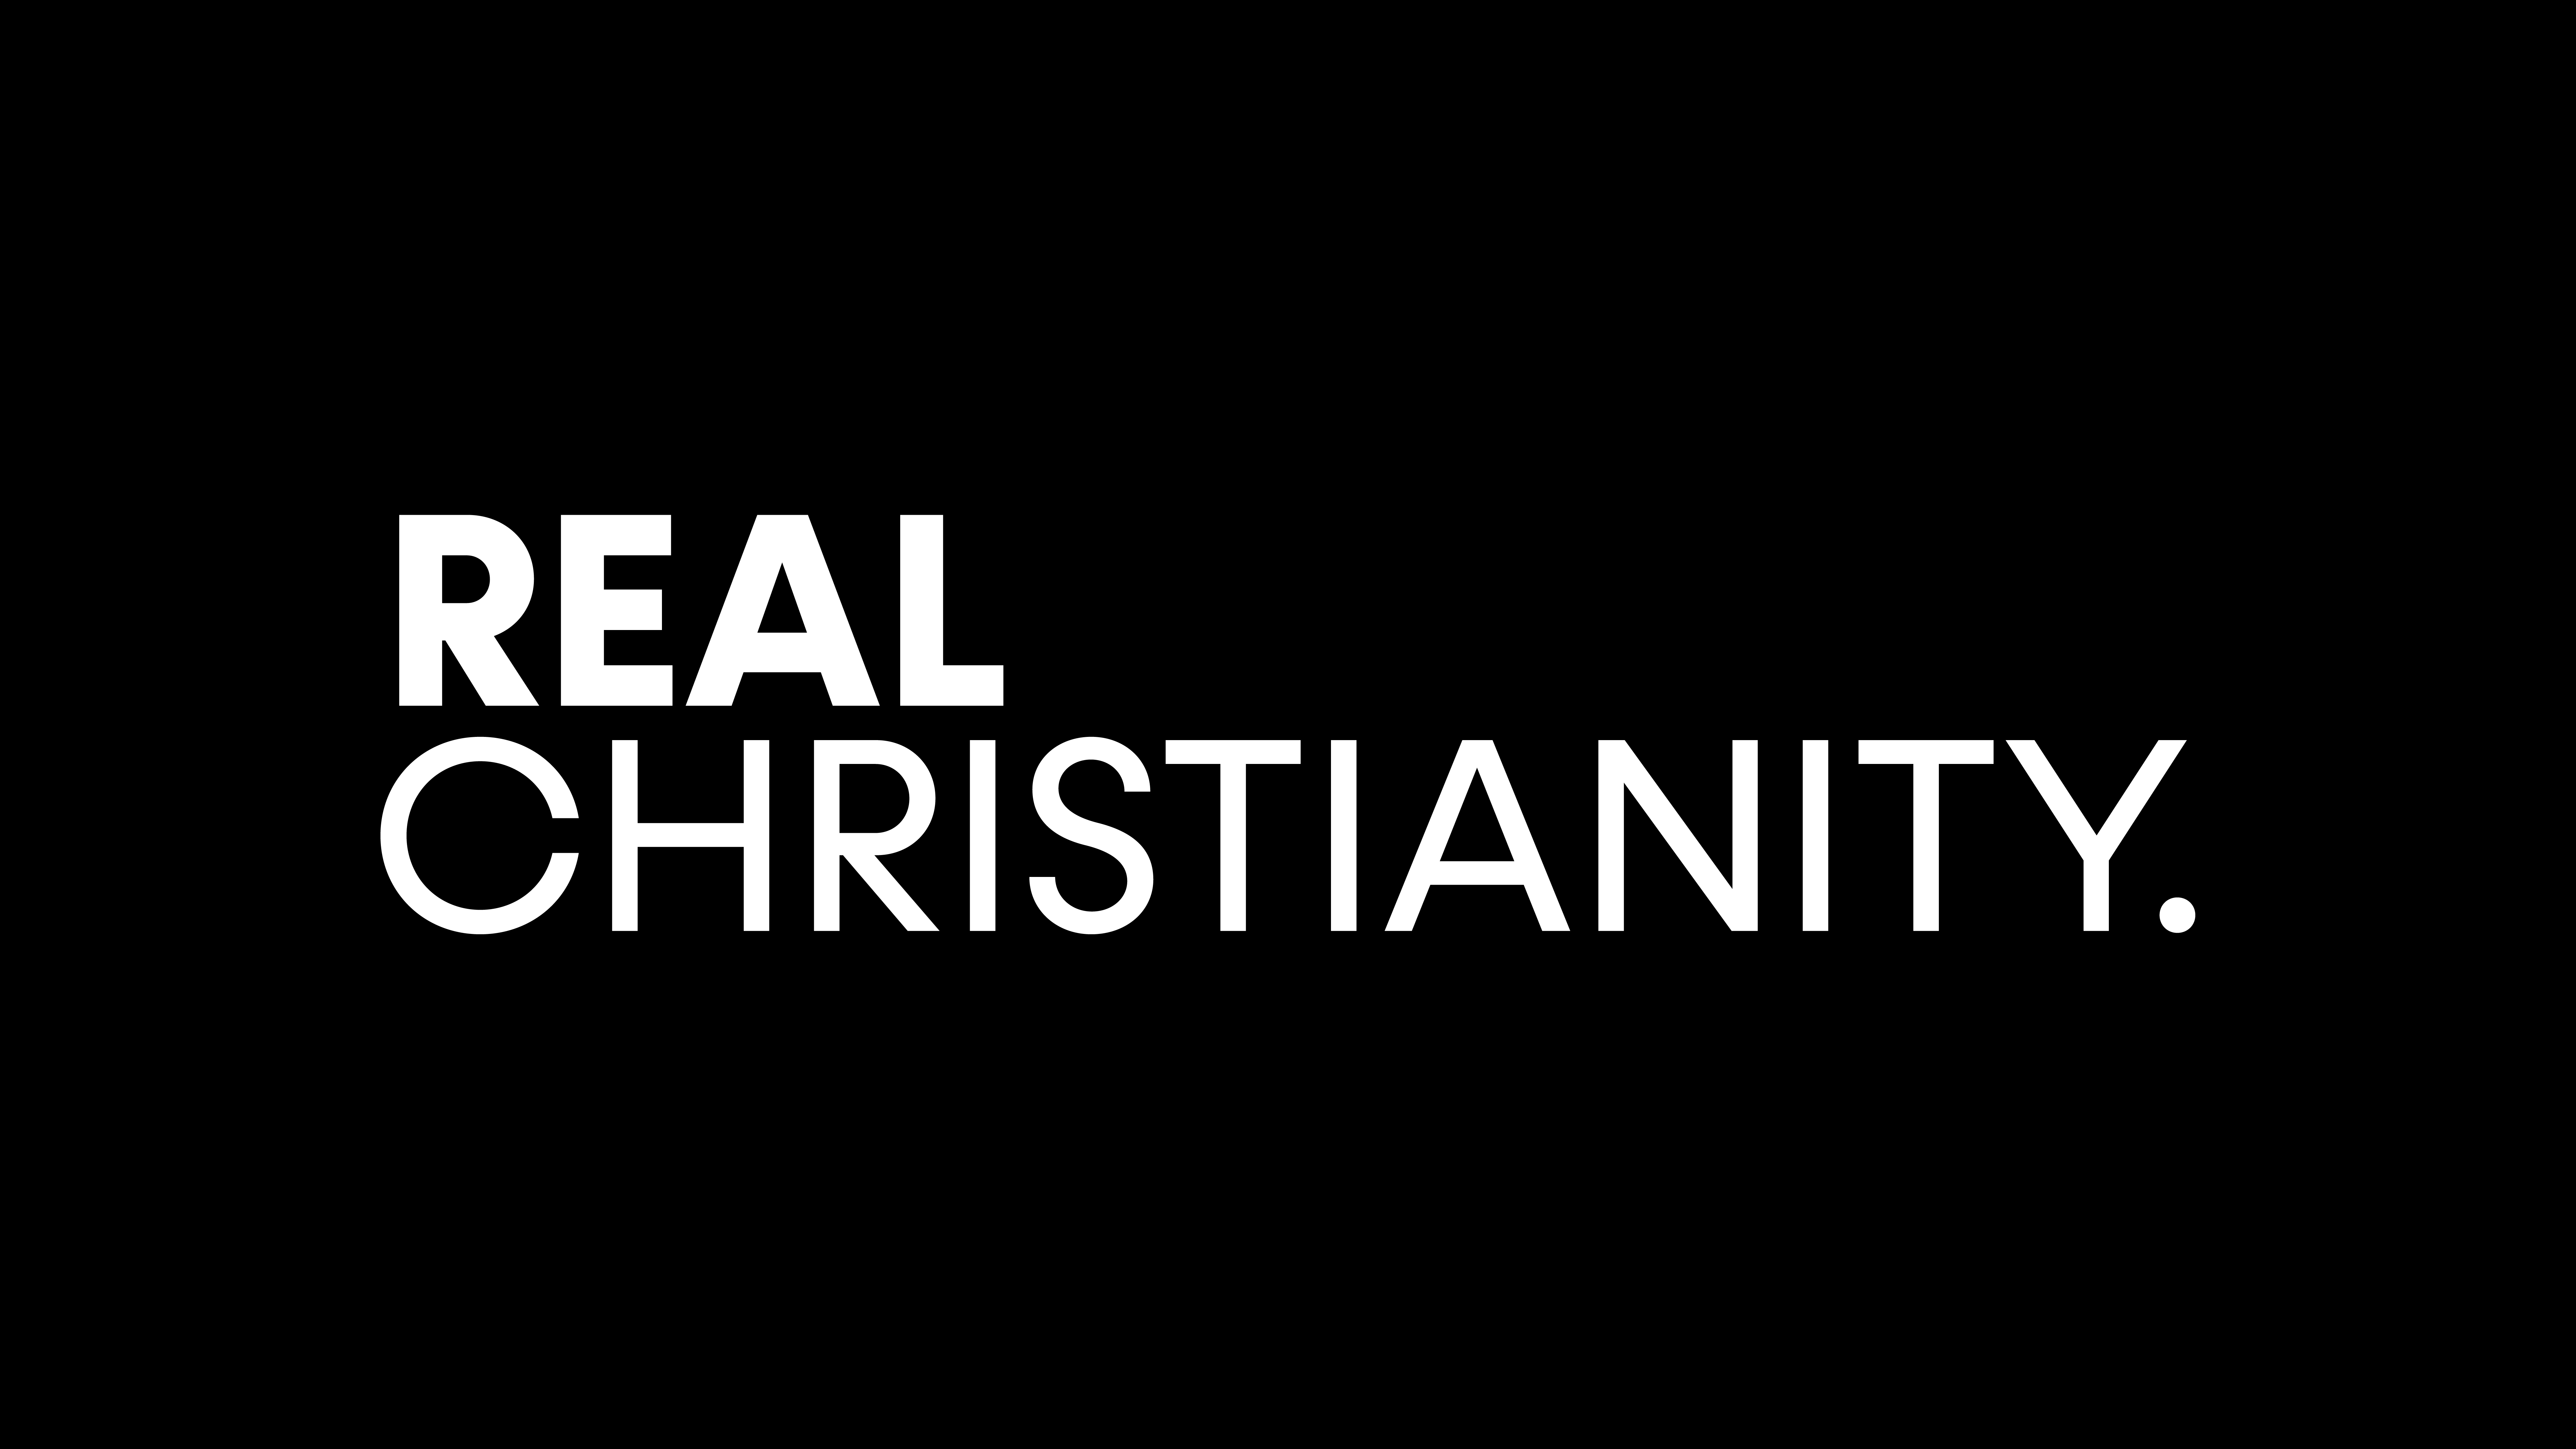 Real Christianity.